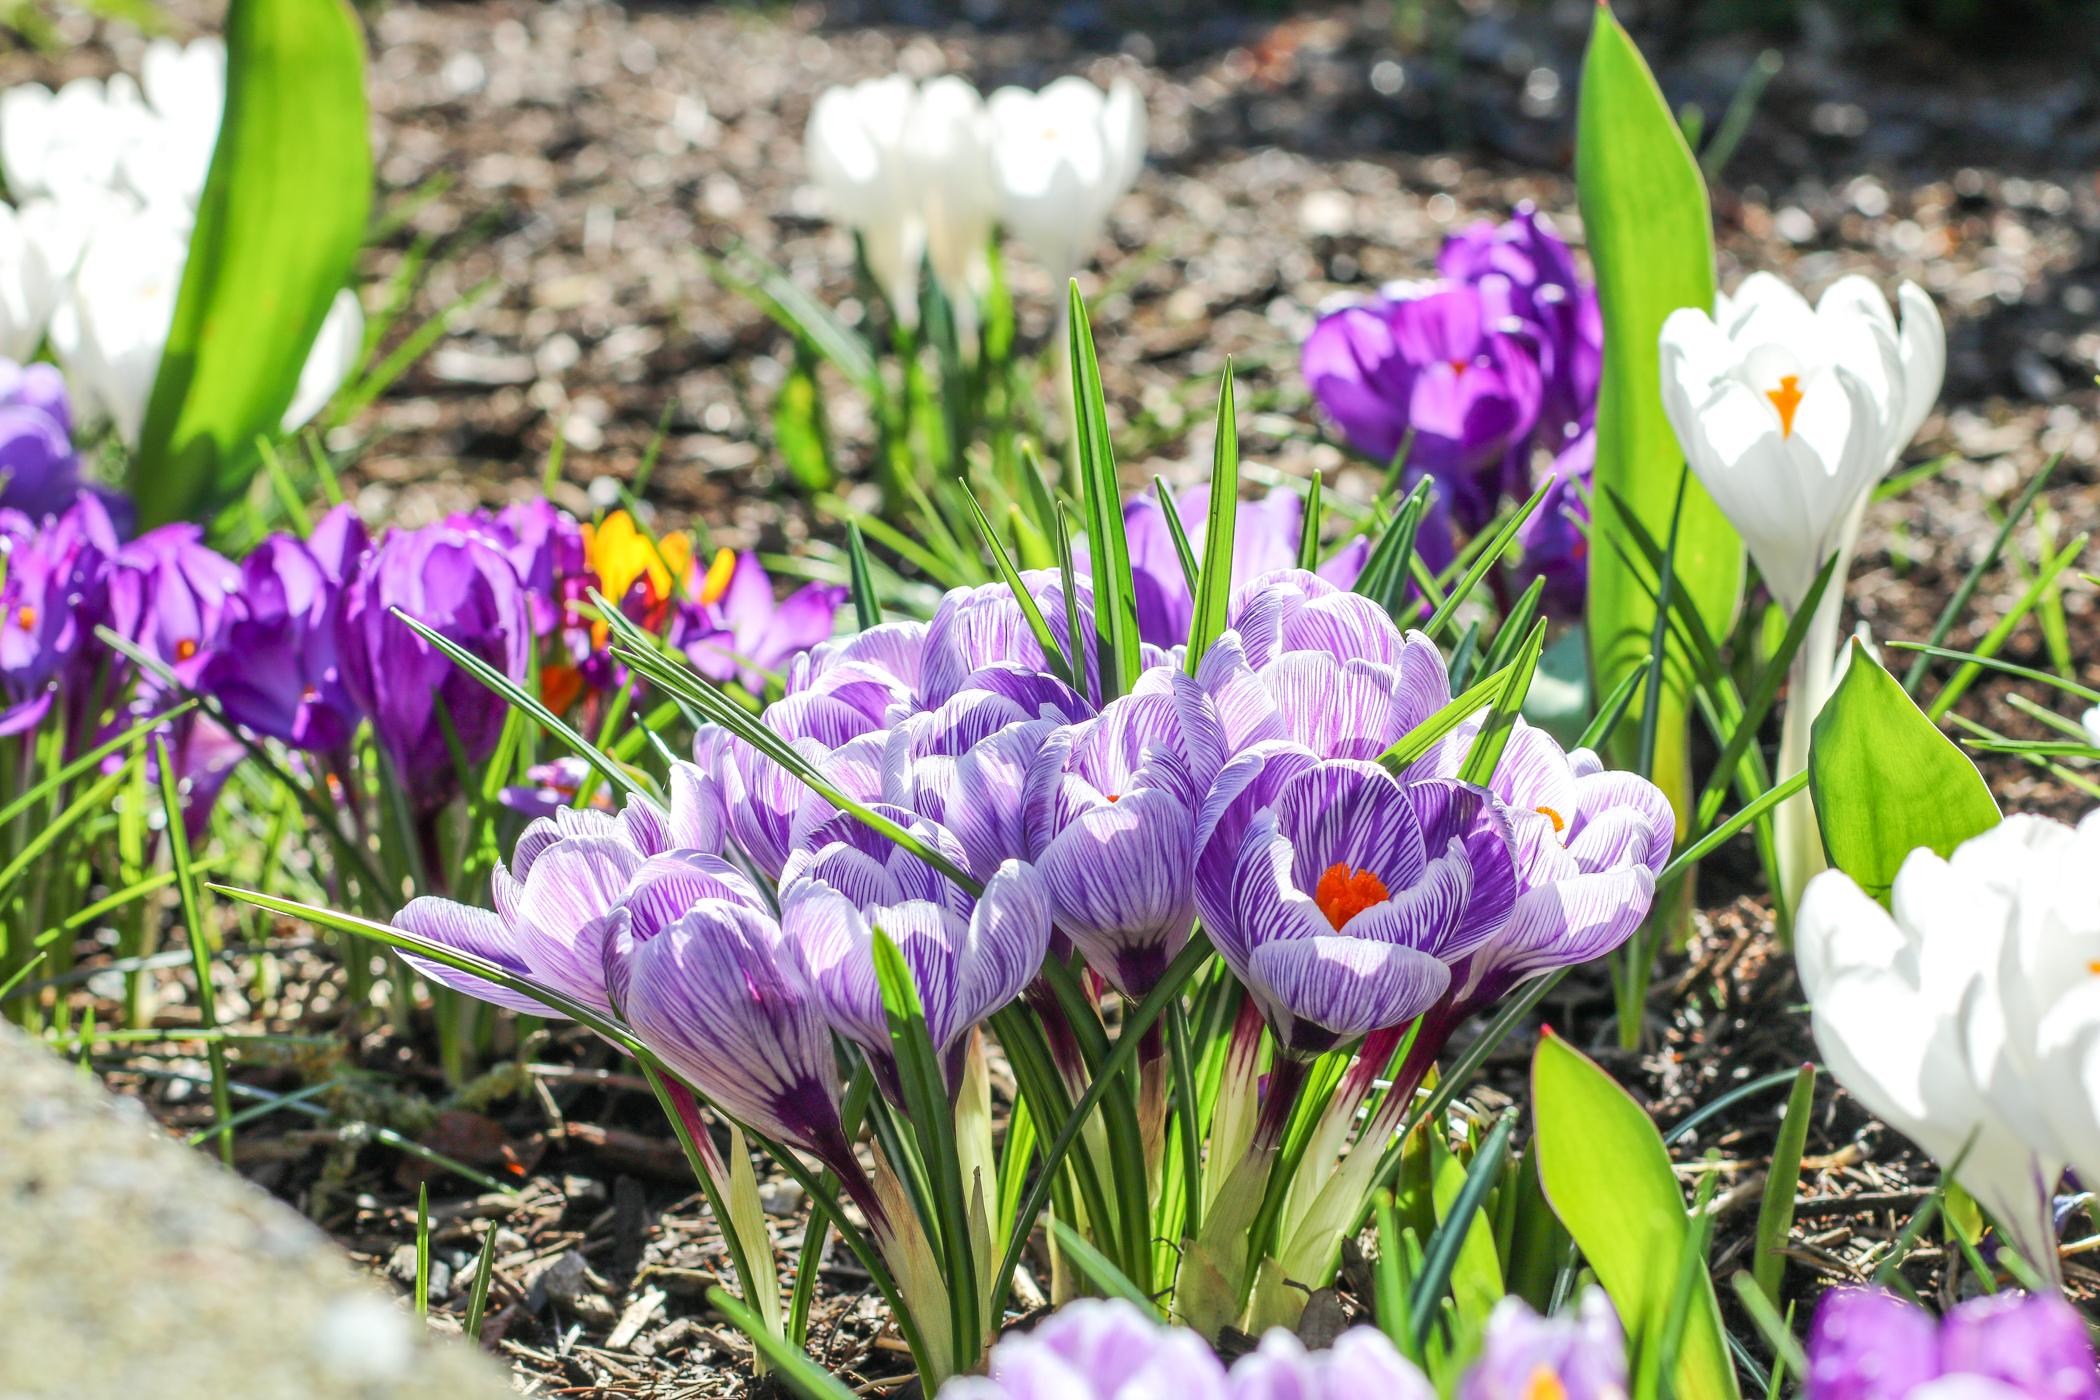 Flowers blooming at Elim Village Garrison Crossing—a sign that spring is here!